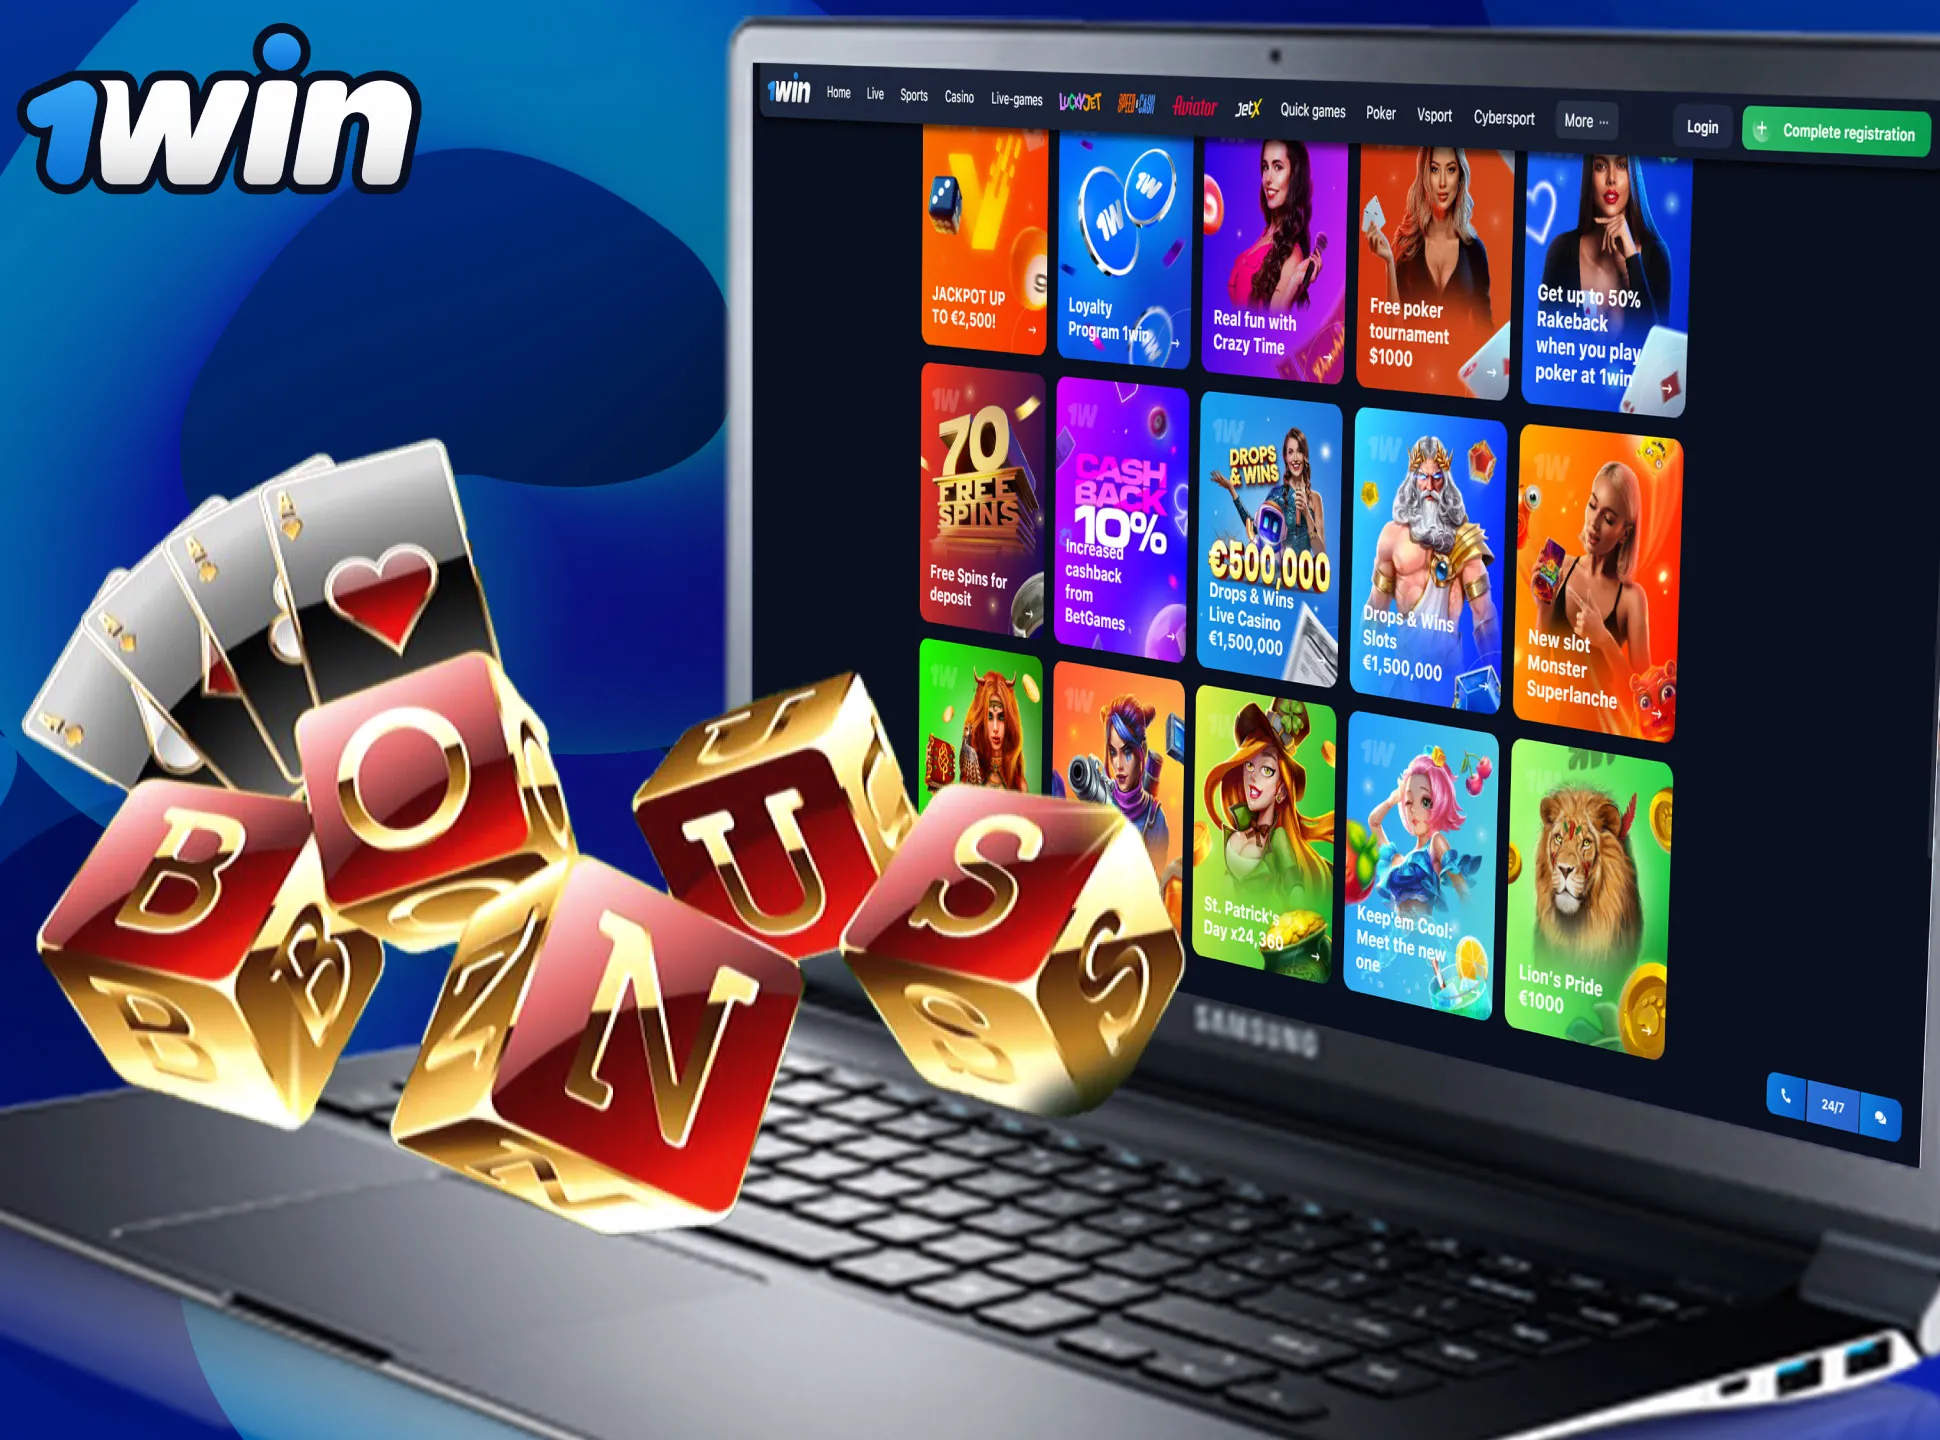 You can get 70 free spins on slots after the first deposit.